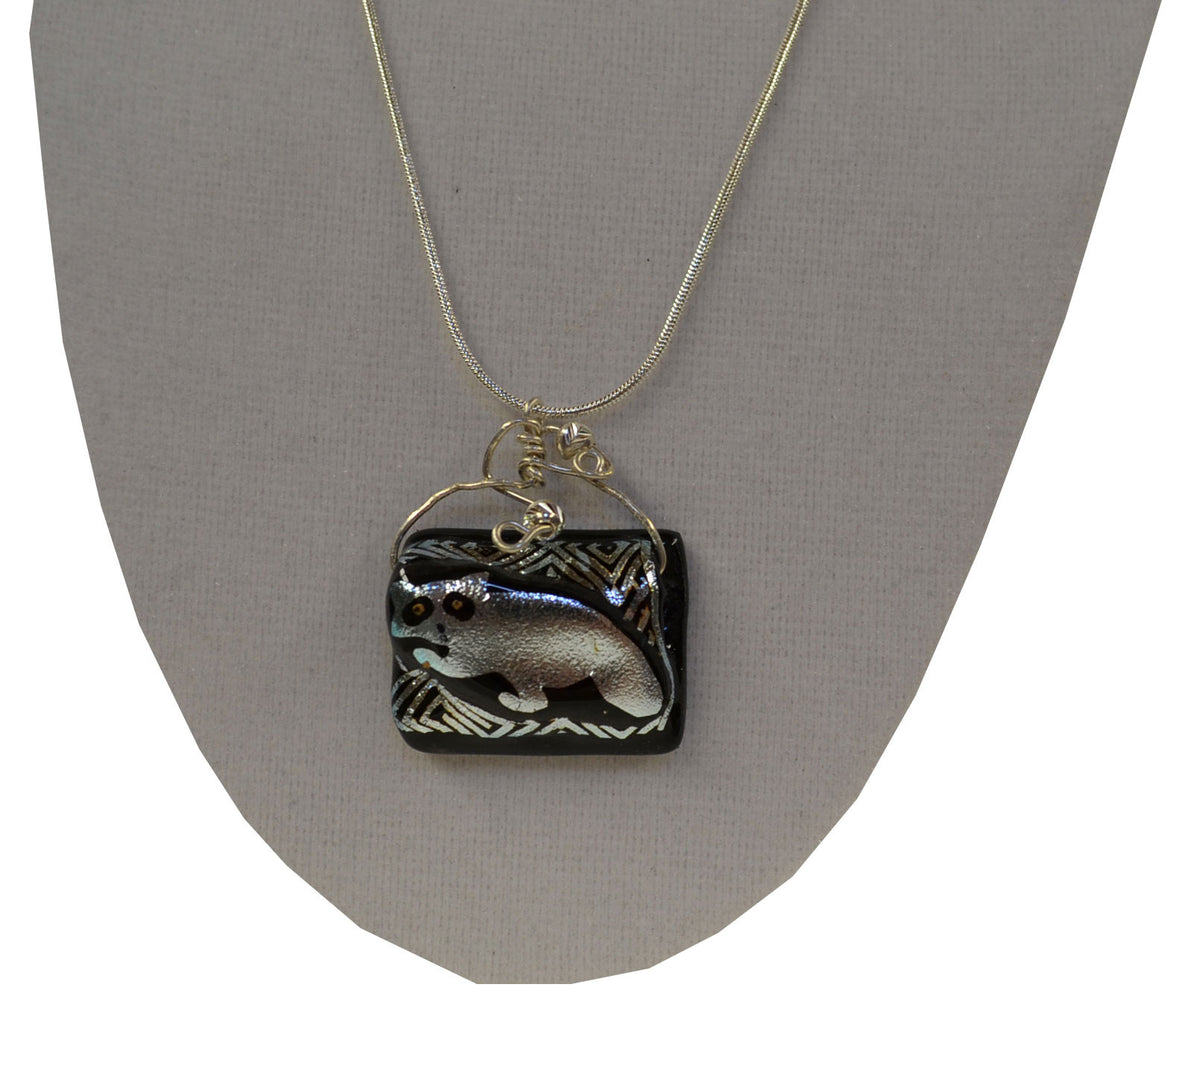 Zig Zag Glass Raccoon Necklace - Squirrels and More